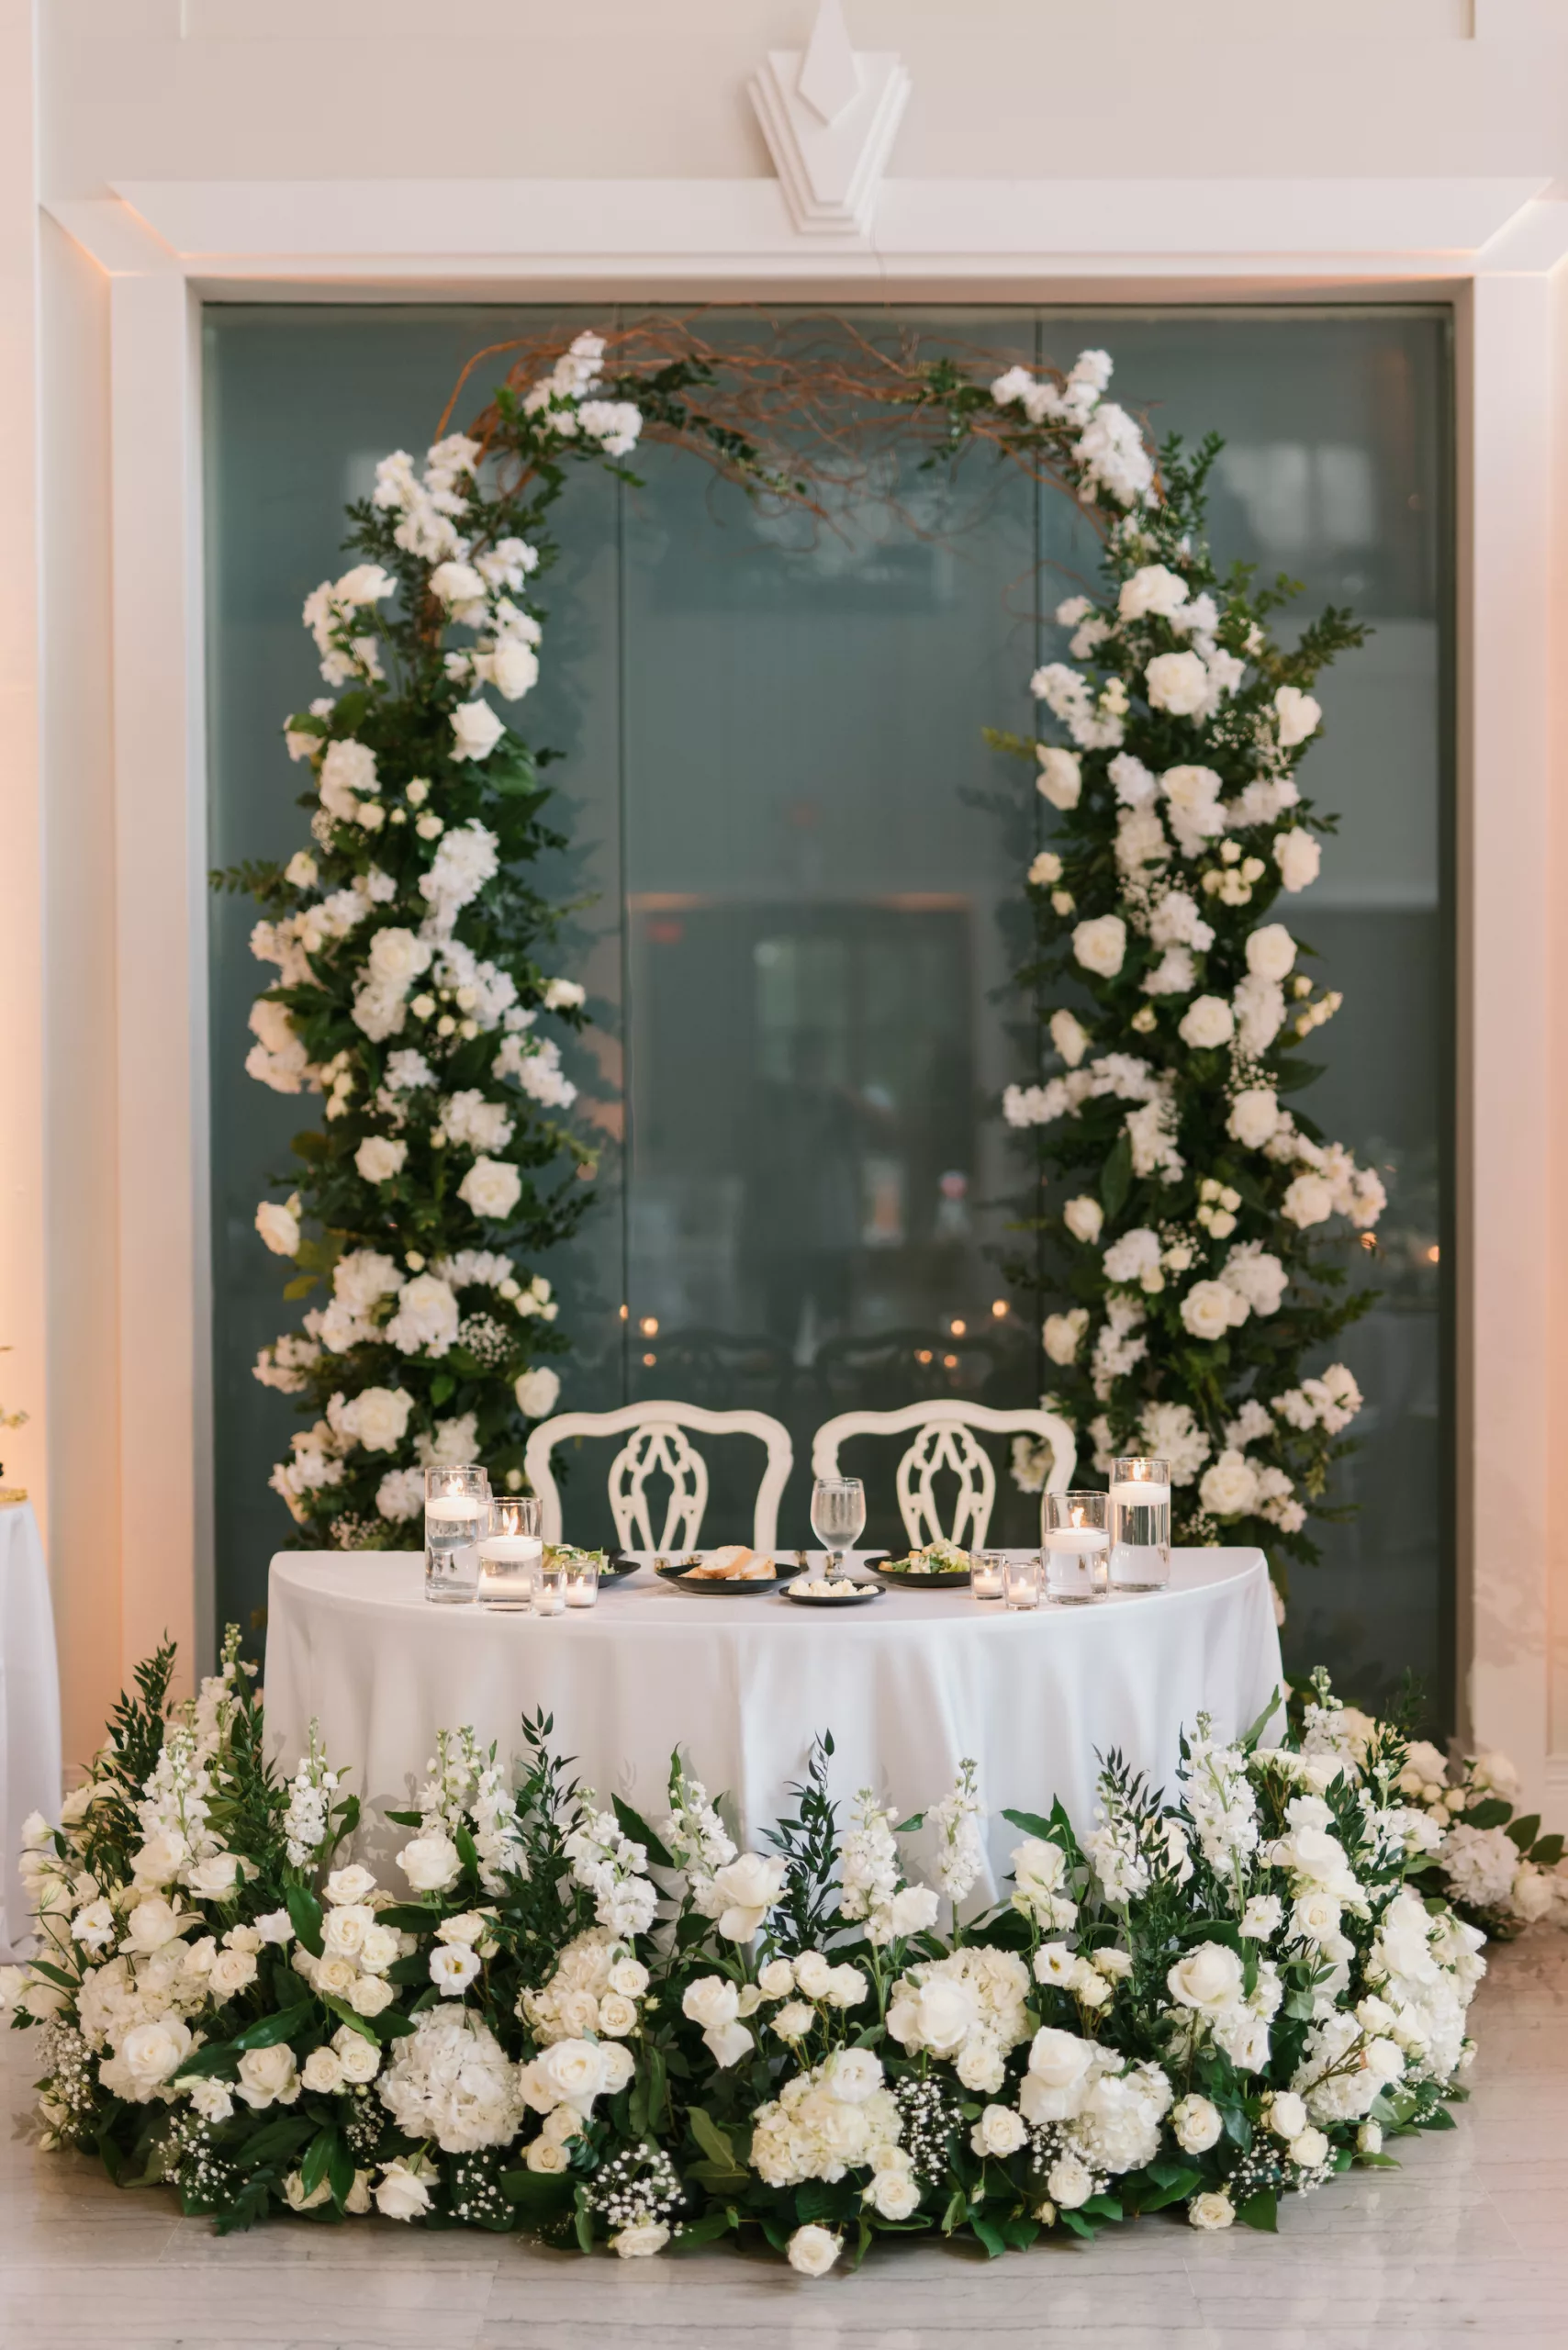 Classic Wedding Reception Sweetheart Table Inspiration | White Roses, Hydrangeas, Baby's Breath, and Greenery Floral Arrangement Backdrop Ideas